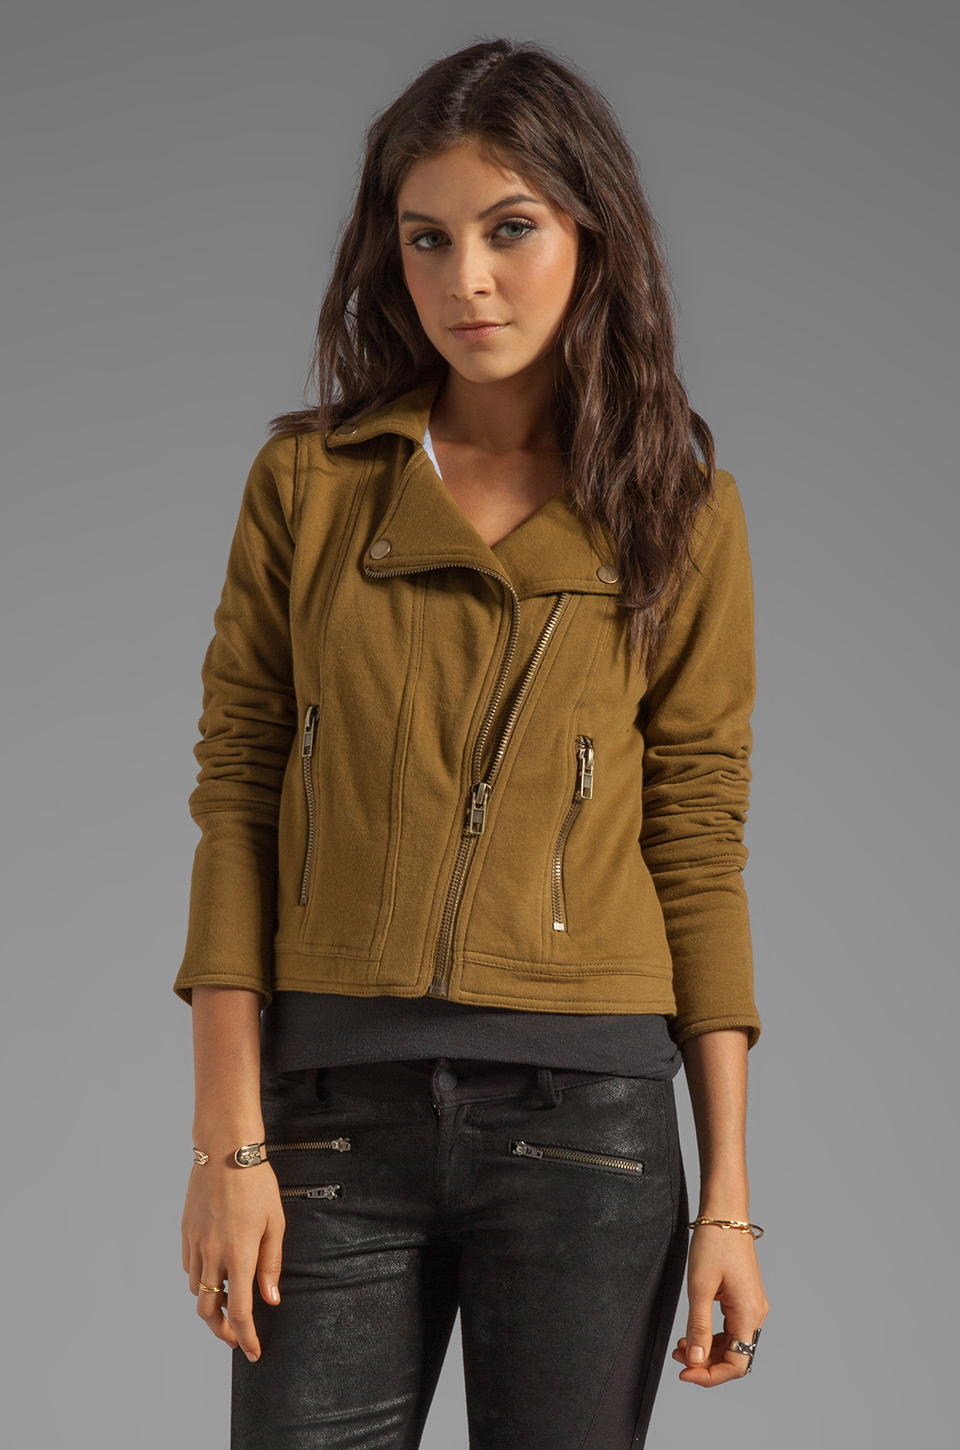 Lyst Chaser Fleece Moto Jacket in Olive in Natural